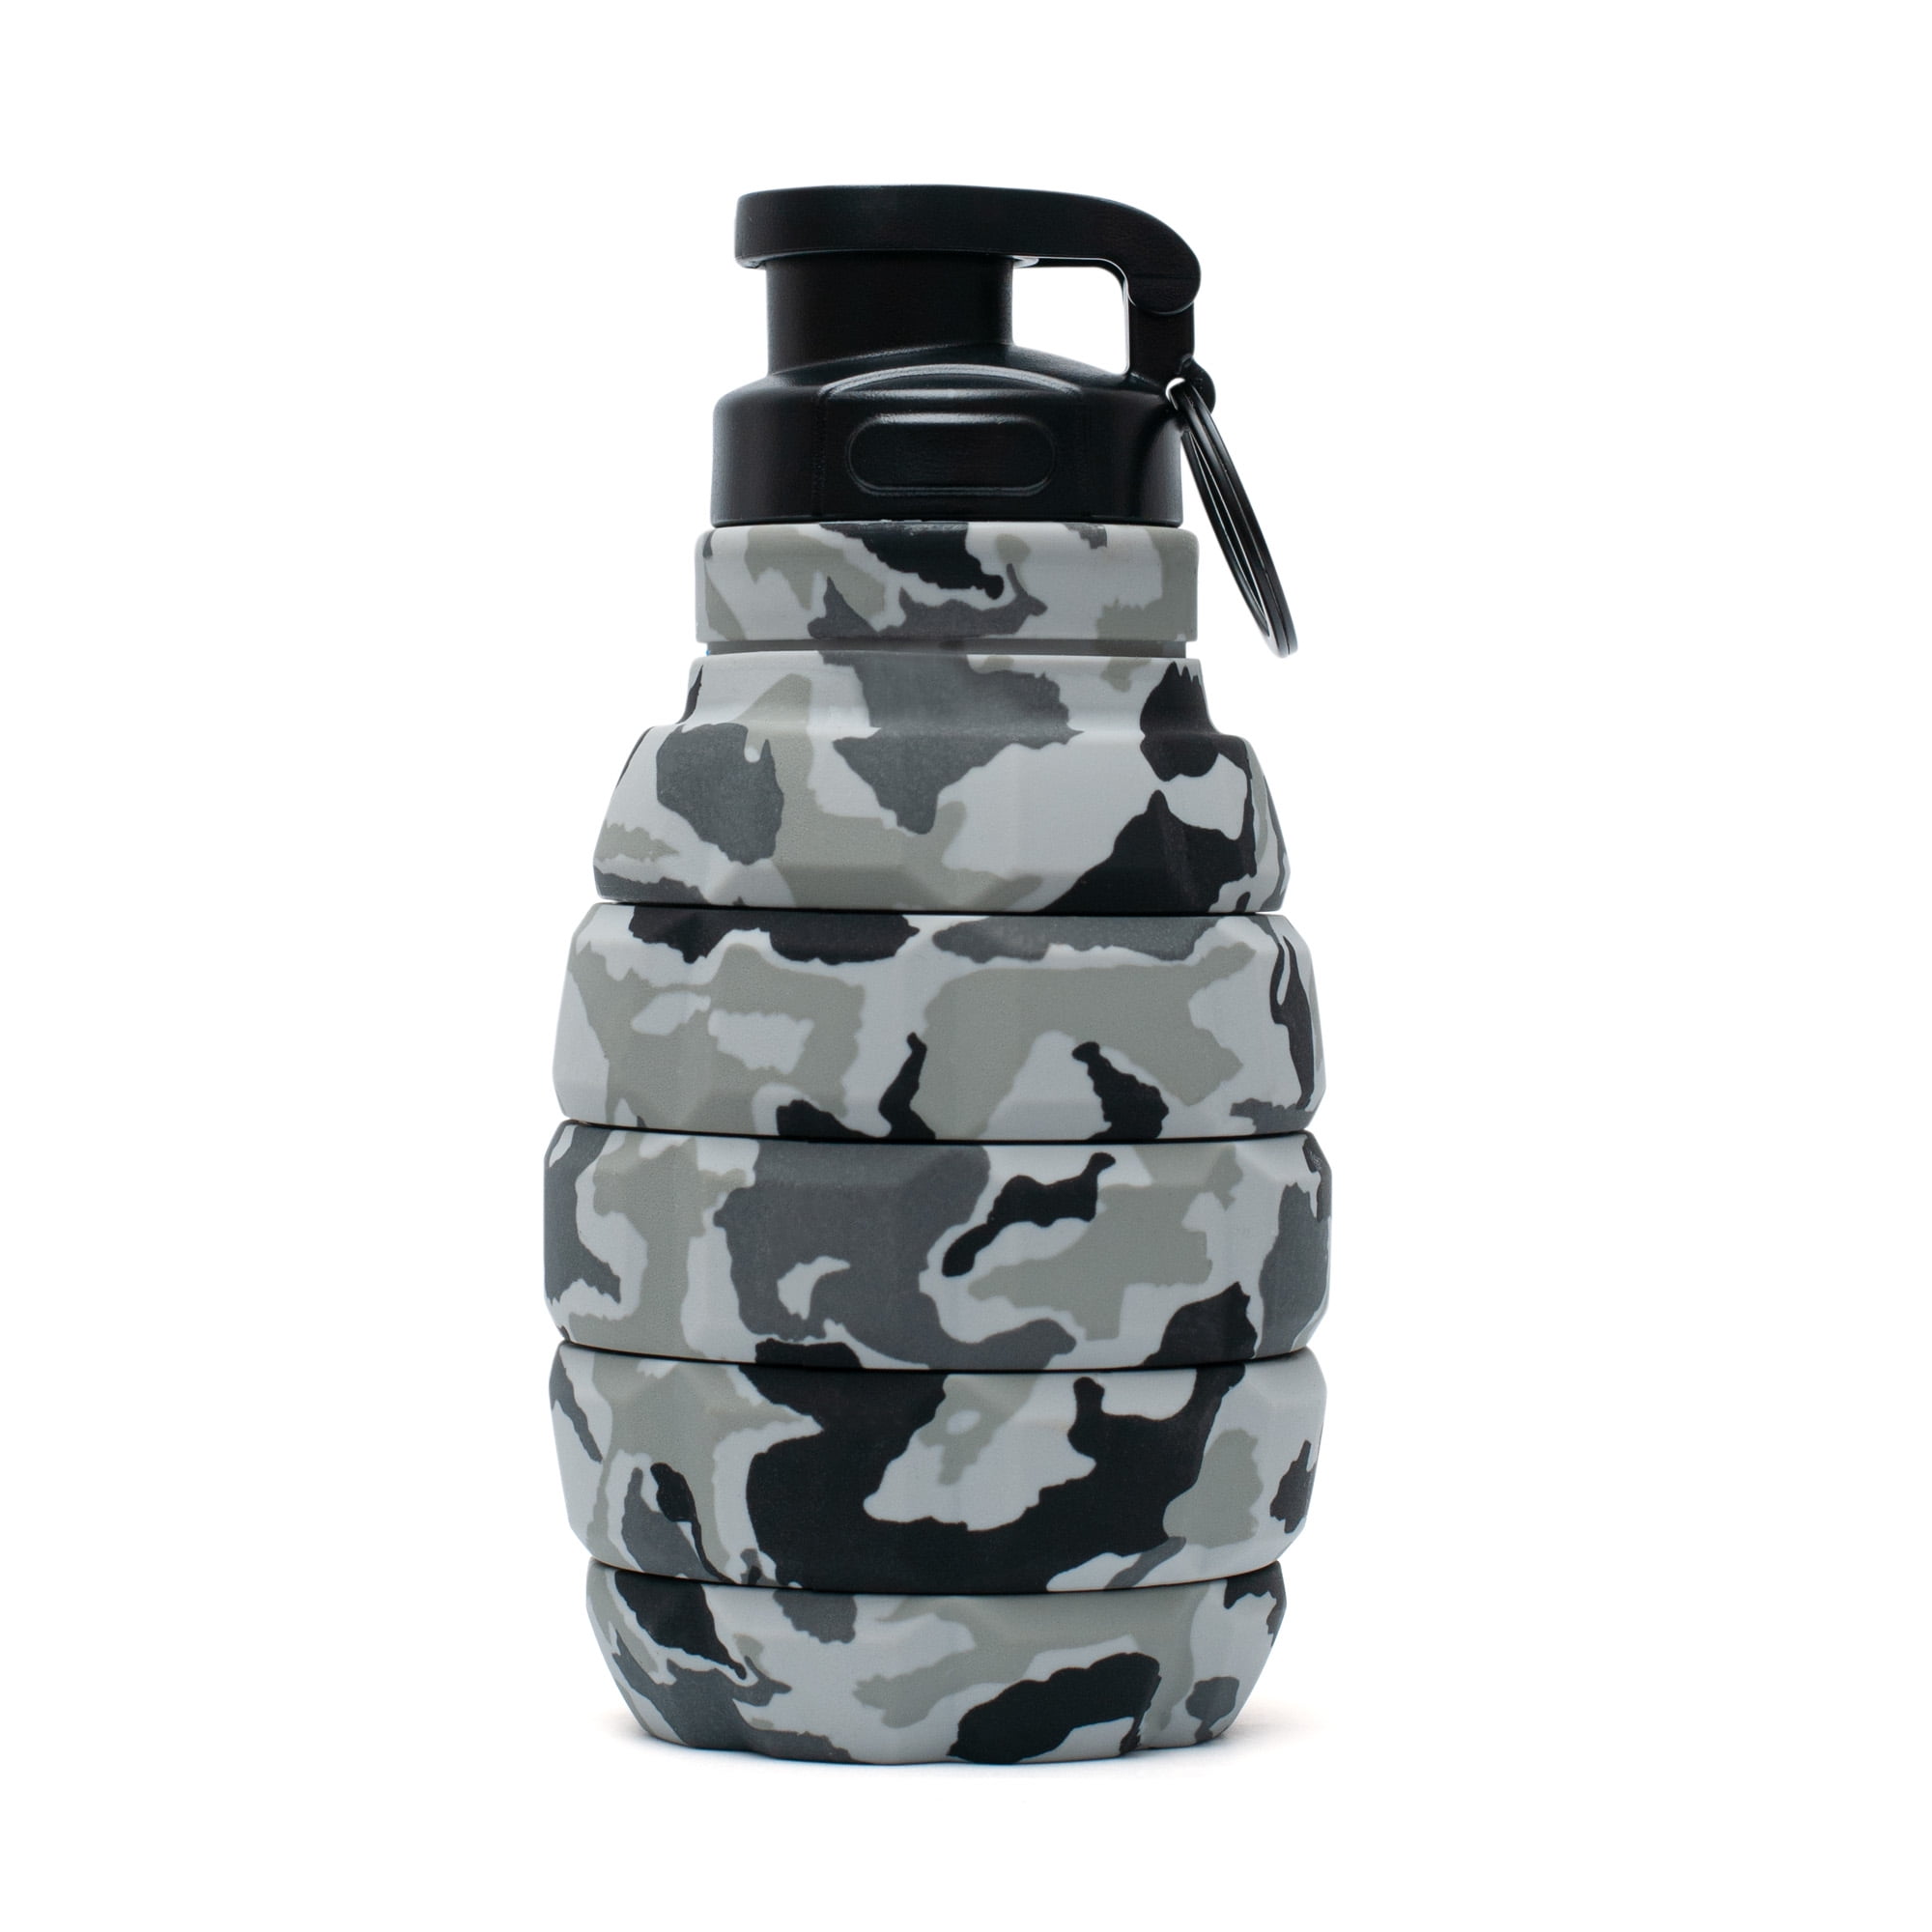 Tufcup Spit Cup Spittoon Bottle - Reusable Spit Dipping Cup with Lid ...